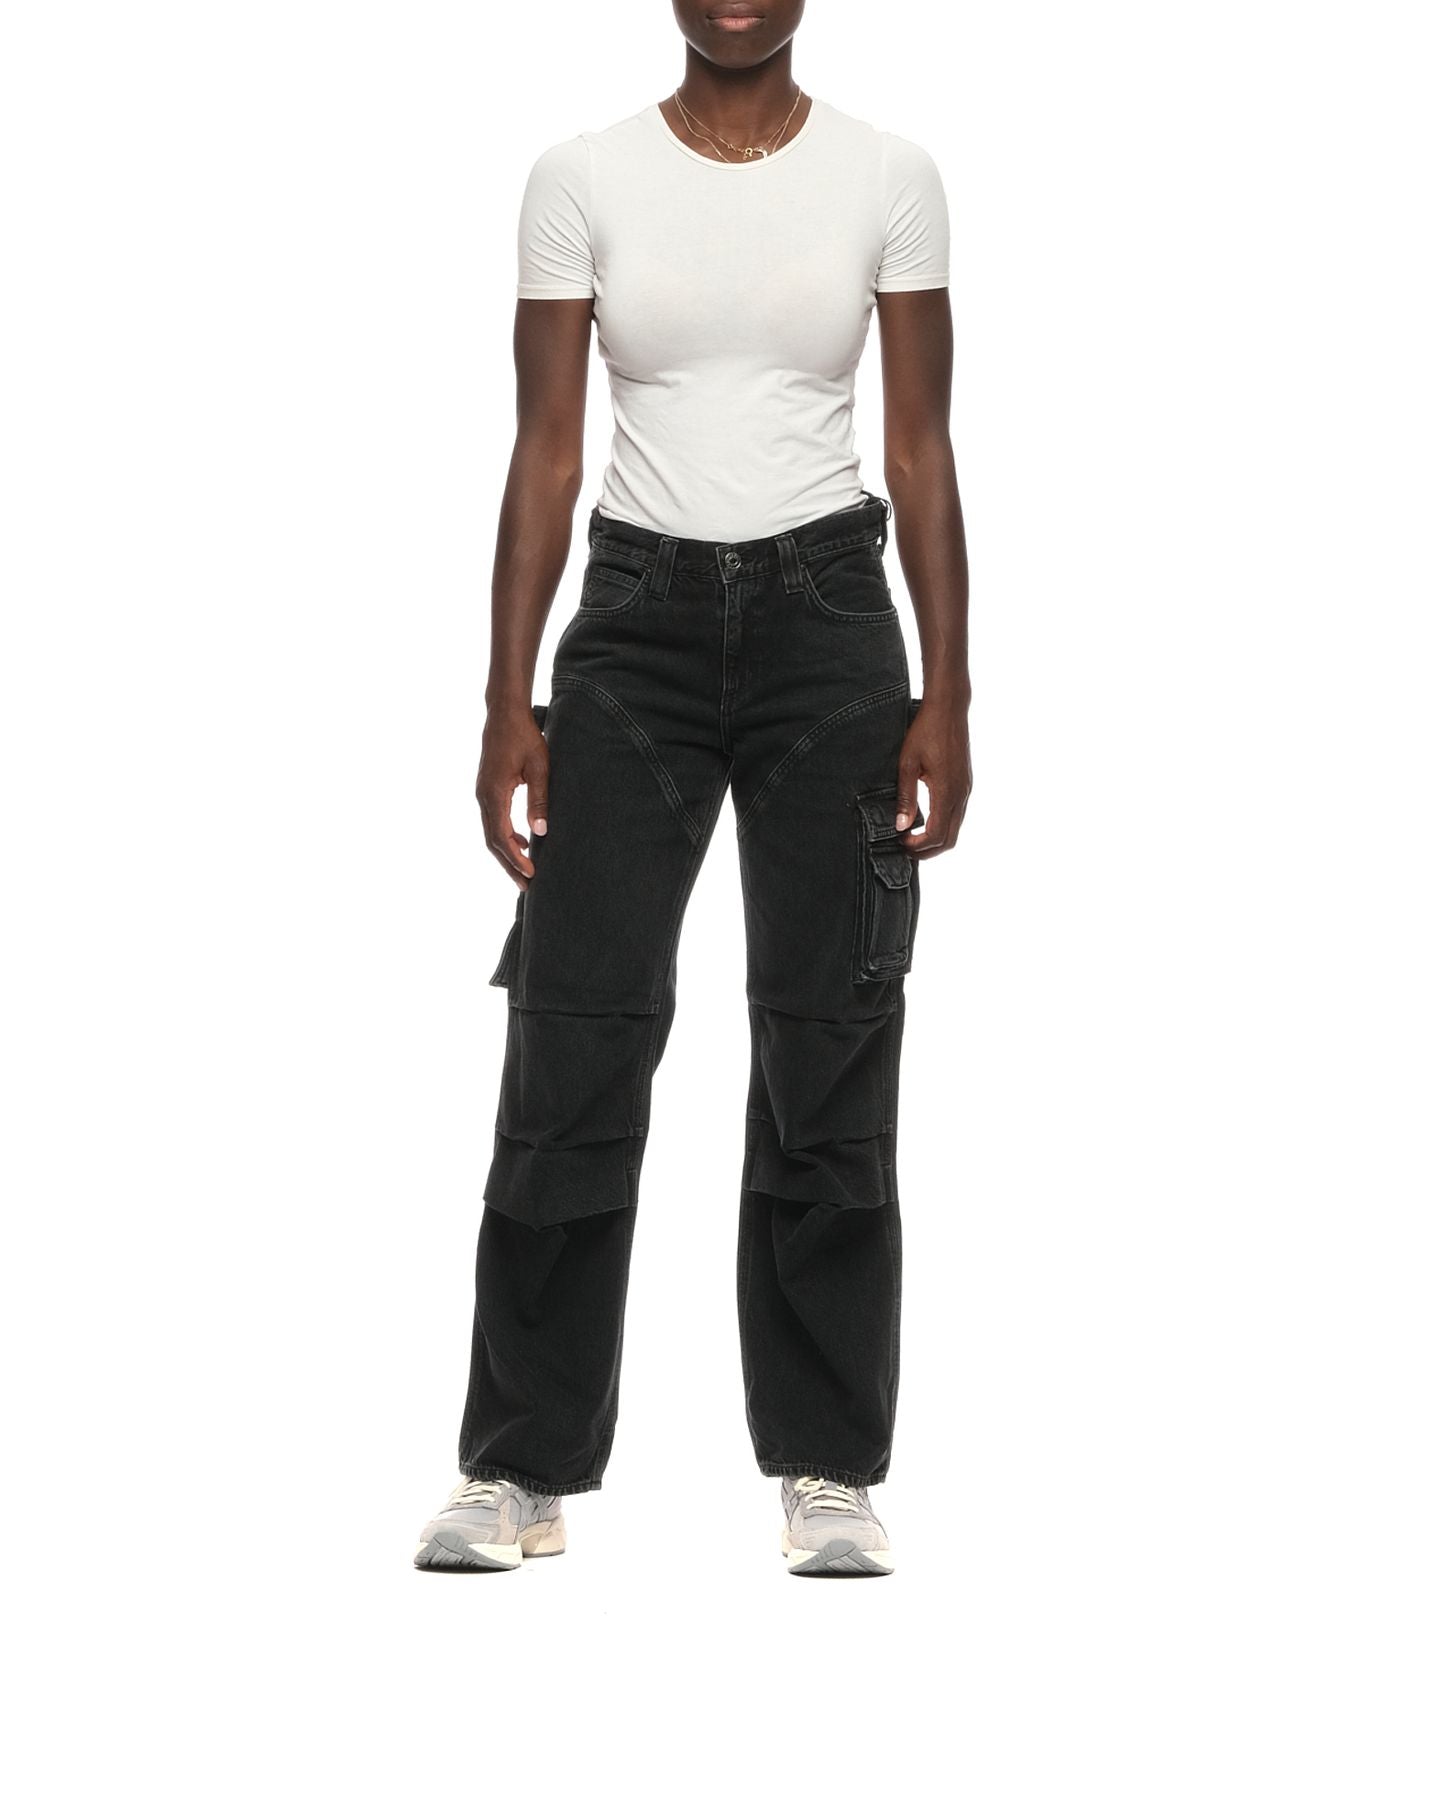 Jeans Woman A9165 1557 Spider Agolde